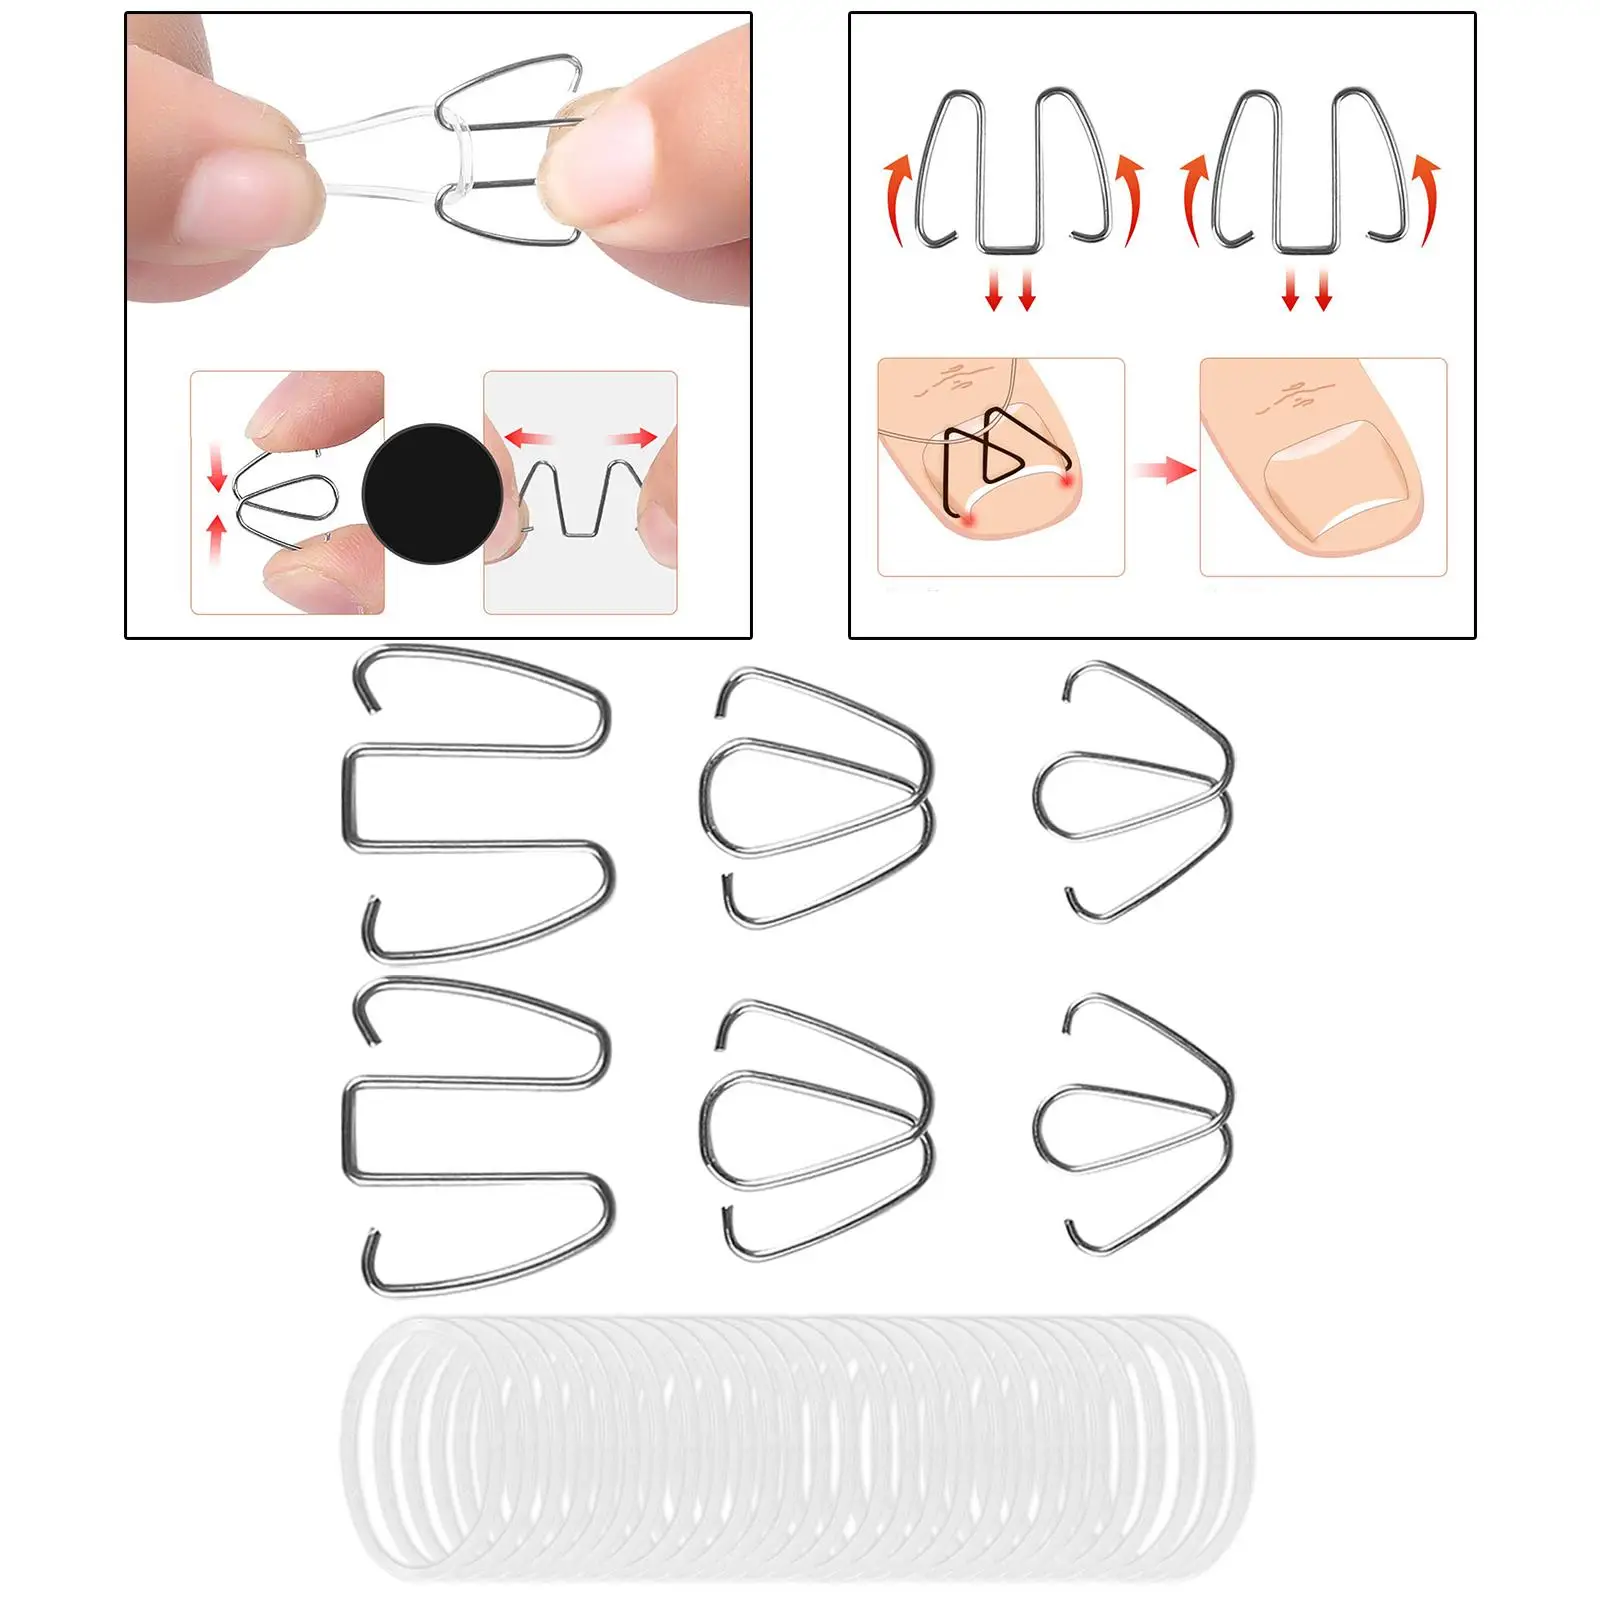 6 Pieces Ingrown Toenail Corrector Wire with Rubber Rings Foot Care Tool Ingrown Toenail Lifter Recovery Tool Bunion Corrector